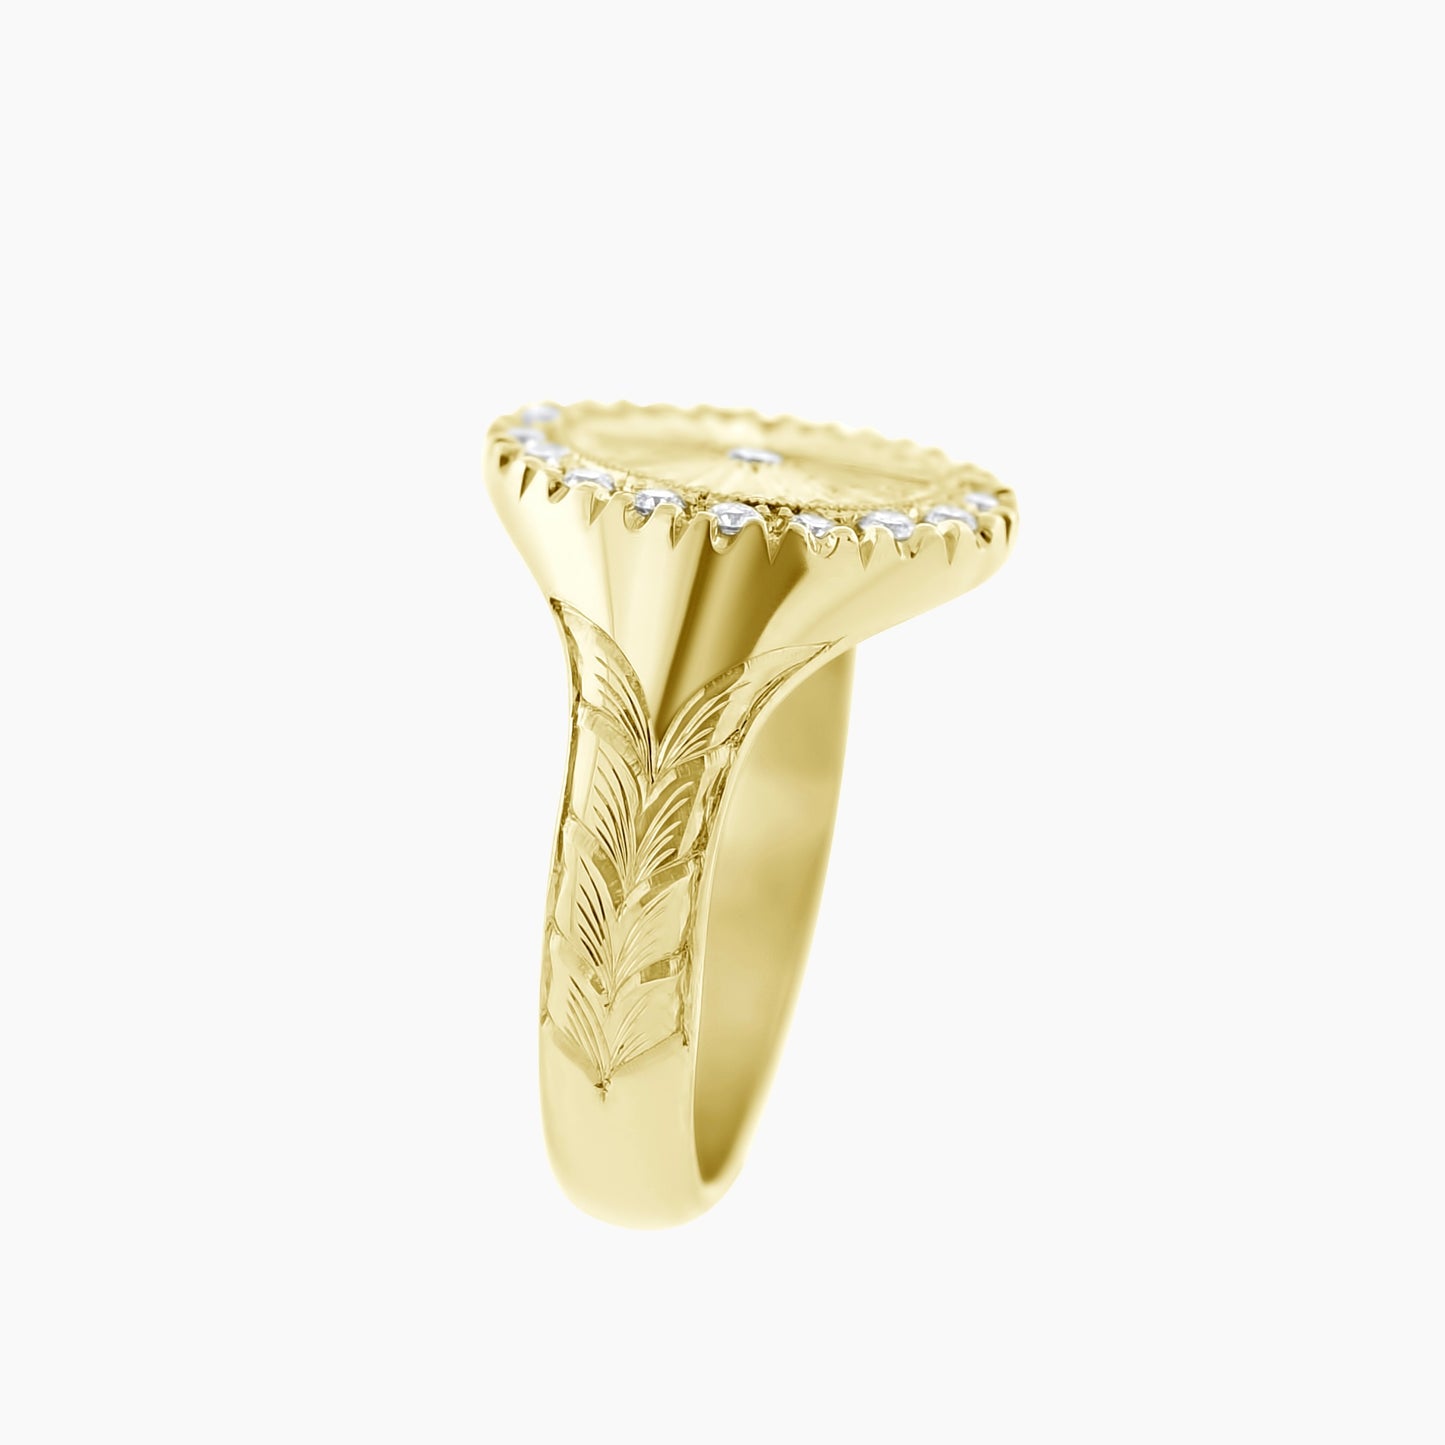 Lux Trabem Ring | Made to Order